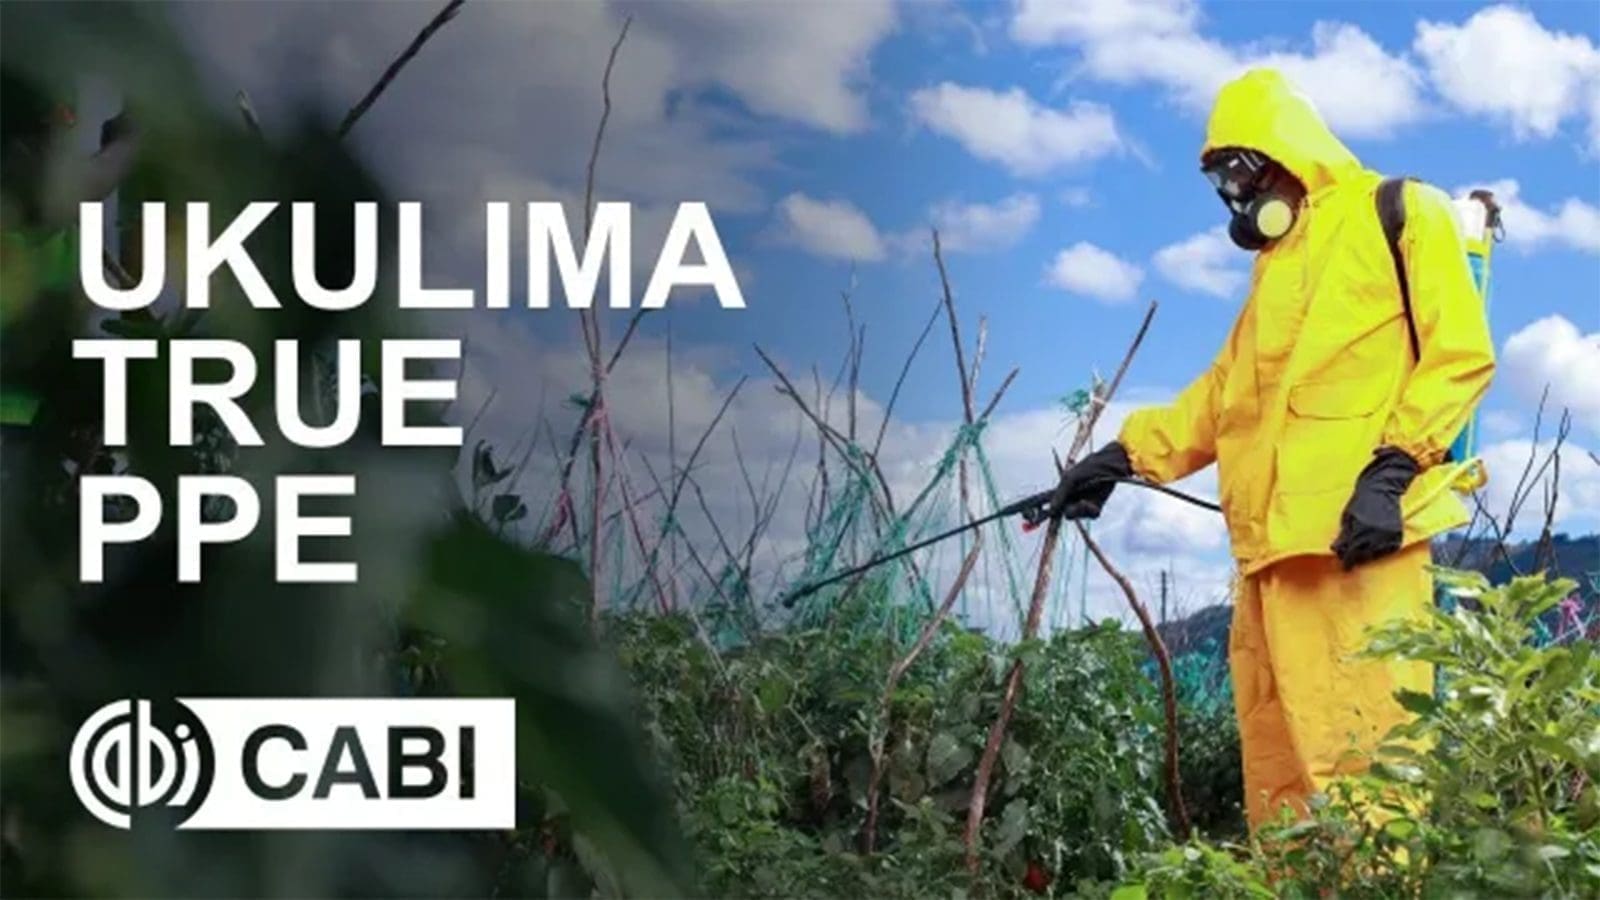 Nakuru County launches ‘Ukulima True’ campaign to promote food safety, reduce pesticide risks